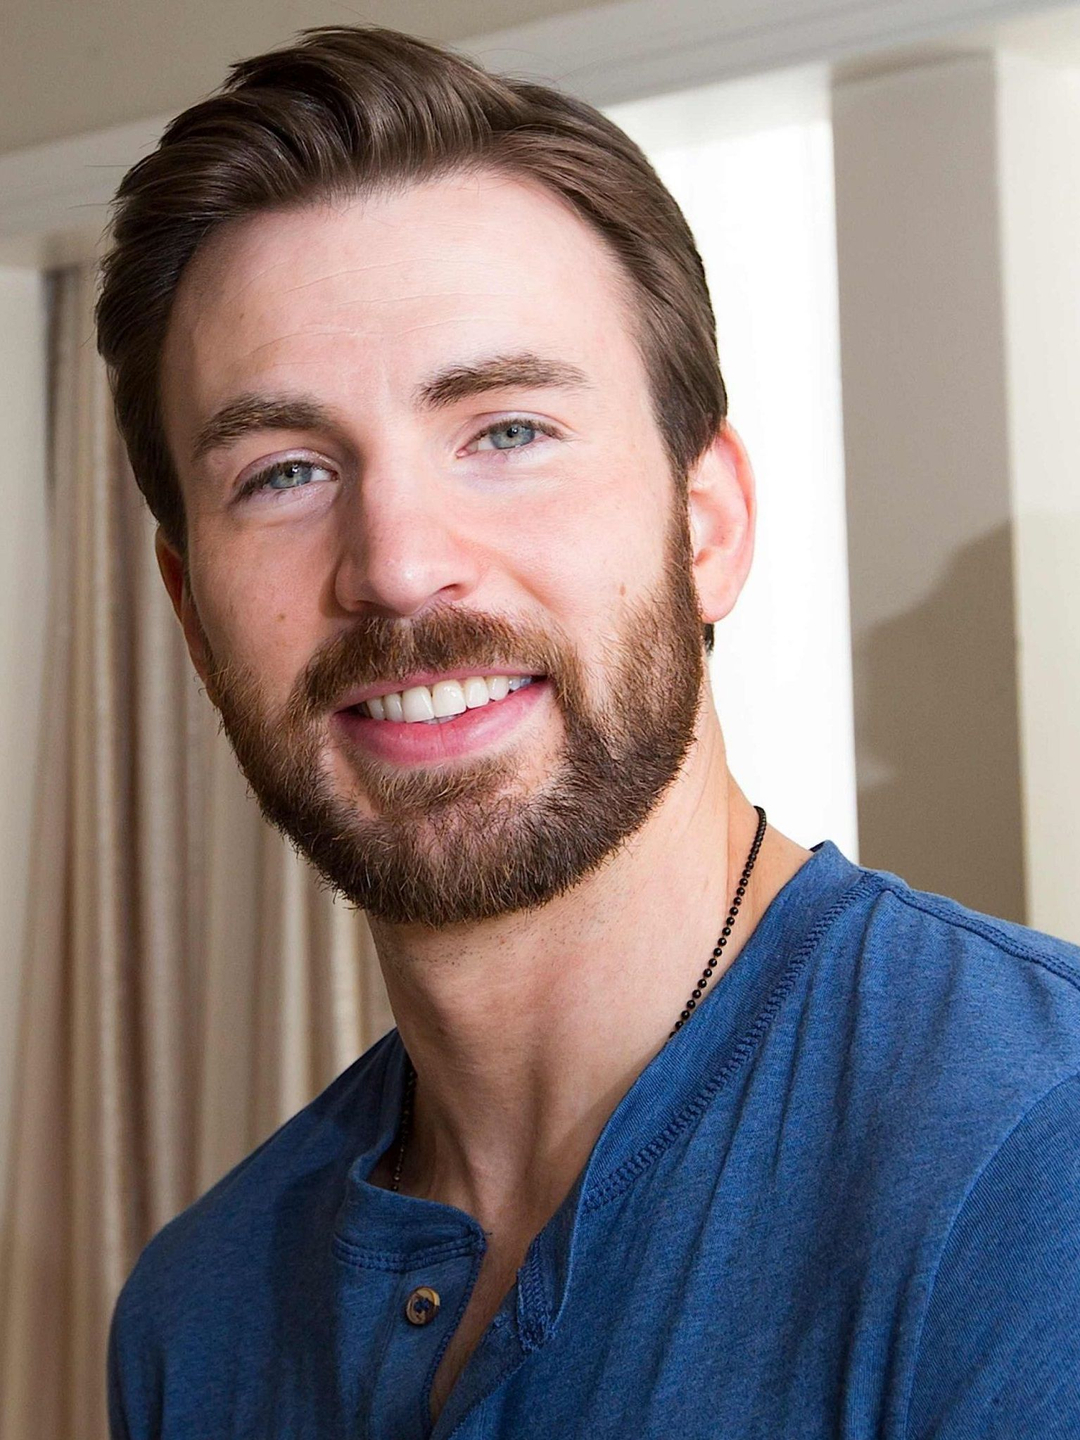 Chris Evans where does he live